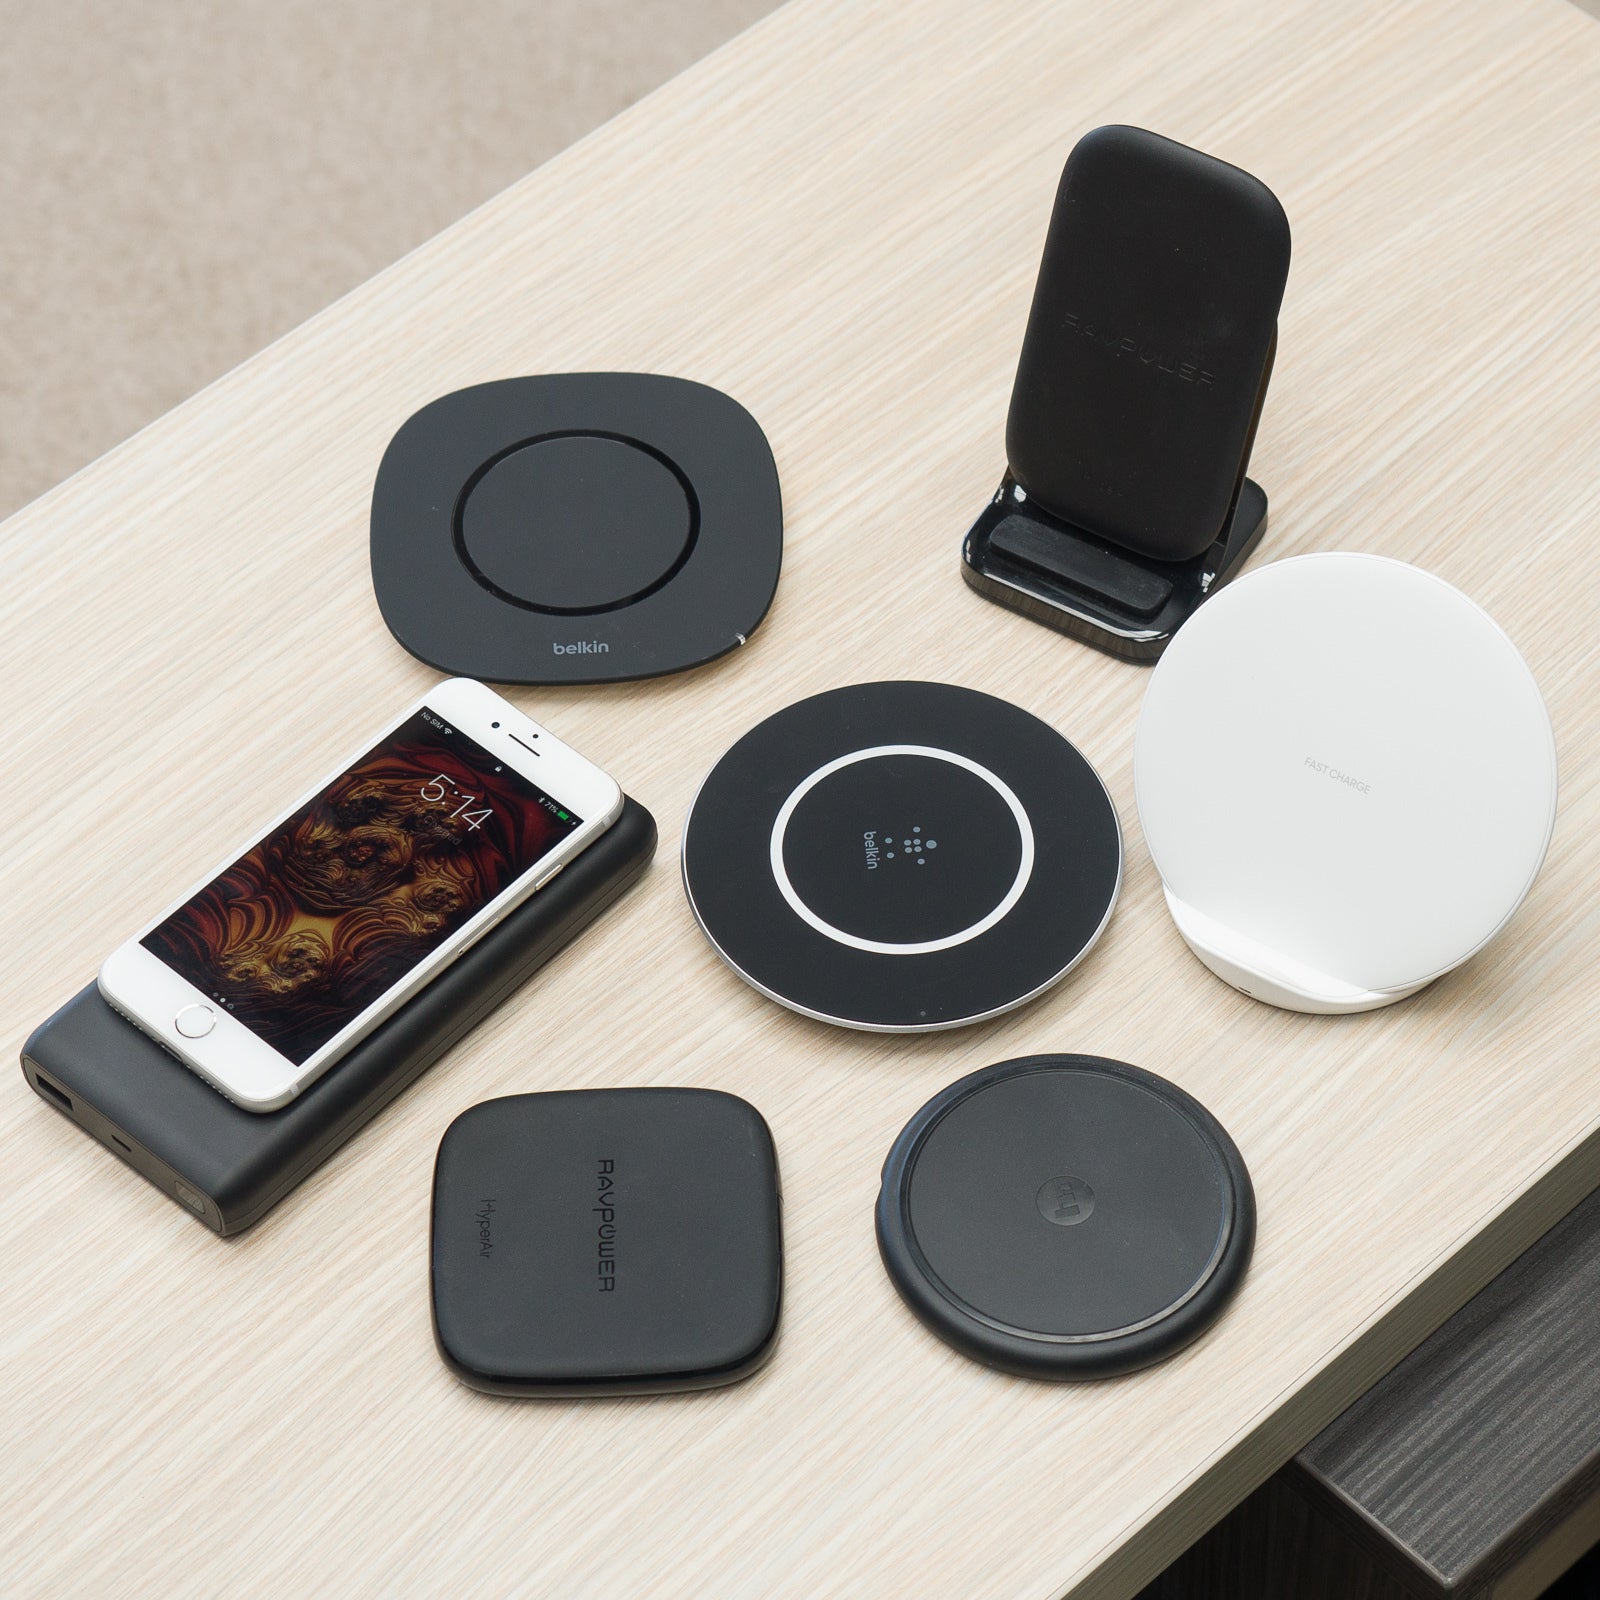 Imagine if wireless chargers worked without a wire. Just put them anywhere and they're ready to go! Now that would be awesome! - Wireless charging is an overrated feature, change my mind